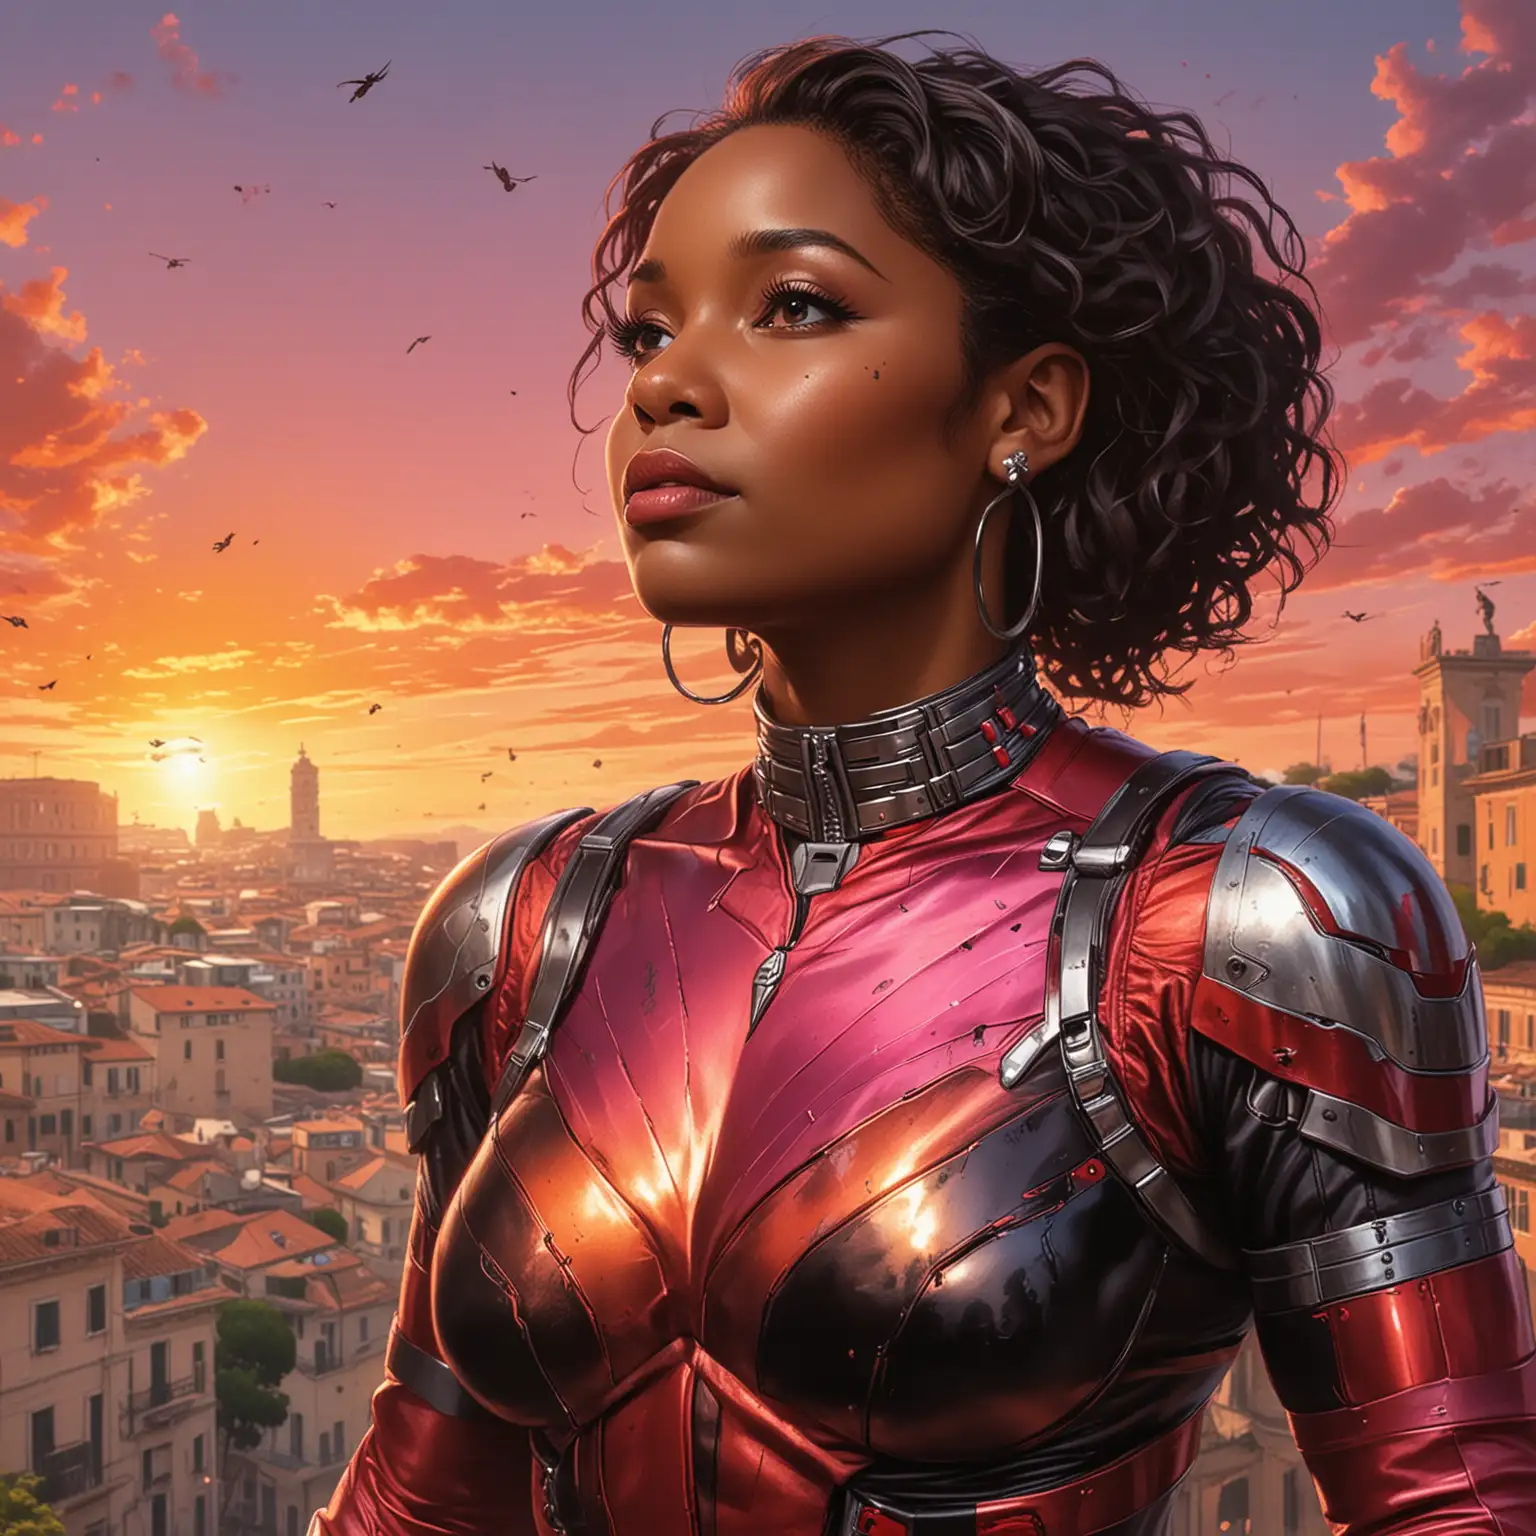 Cover of comic book featuring Ant Man, a superhero with the ability to shrink in size while increasing in strength.A breathtaking sunset over Rome, Italy showcasing vibrant hues of orange and pink painting the sky.Diamond Jewelry,  Necklace, Rings and earrings.Black woman painterly smooth, extremely sharp detail, finely tuned, 8 k, ultra sharp focus, illustration, illustration, art by Ayami Kojima Beautiful Thick Sexy Black women 